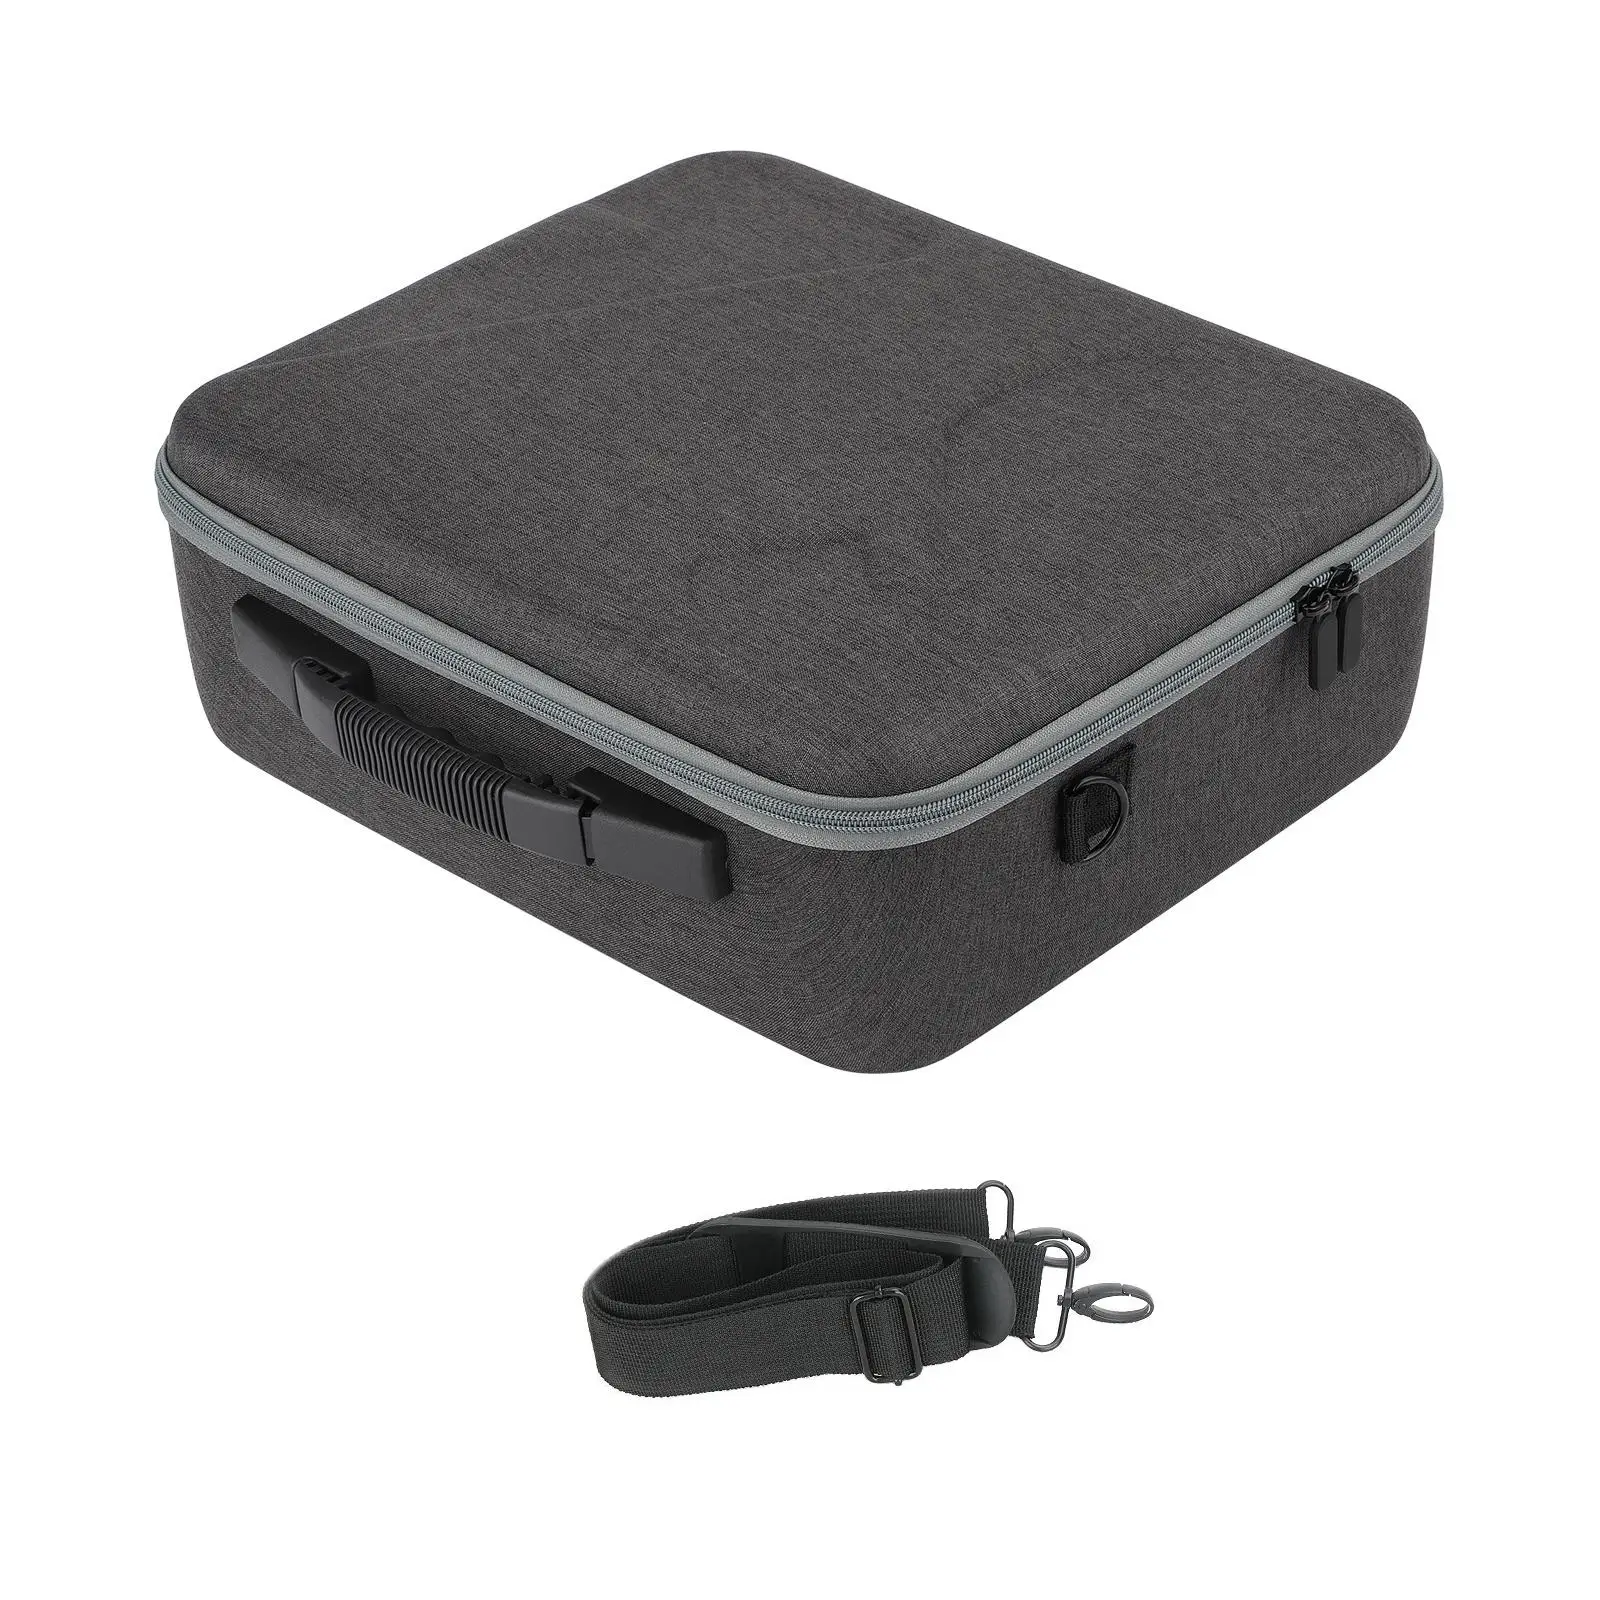 Carrying Case Shockproof Hard Case Outdoor Travel Storage Carrying Bag for Mavic 3 Pro Remote Controller Quadcopter Mavic 3 RC